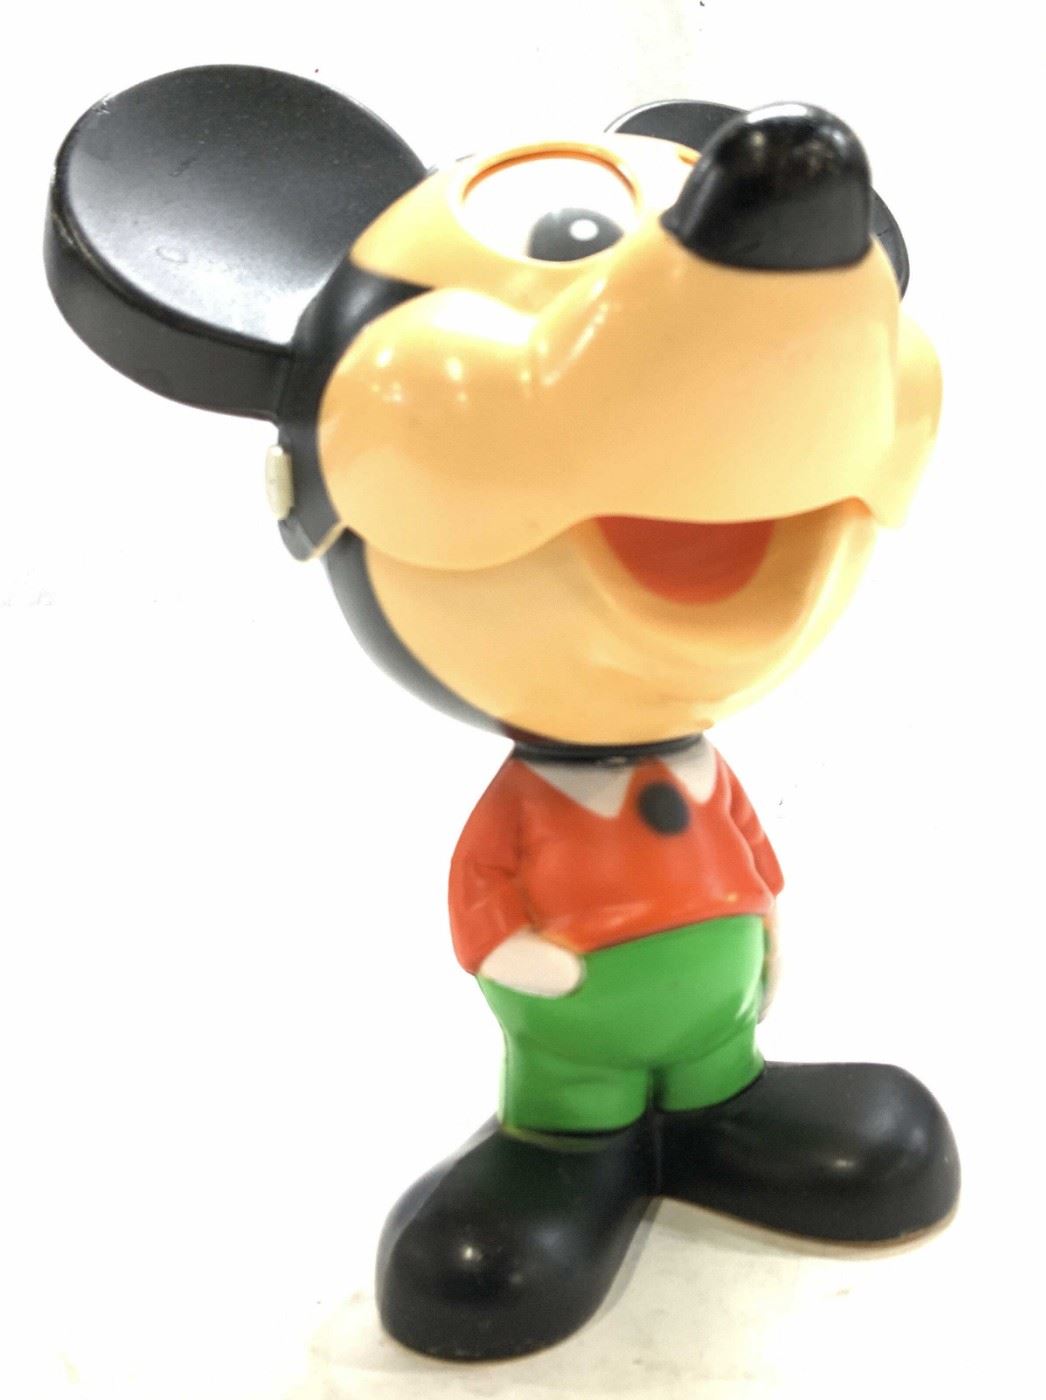 Vintage Mattel Mickey Mouse Pull Toy, 1976
